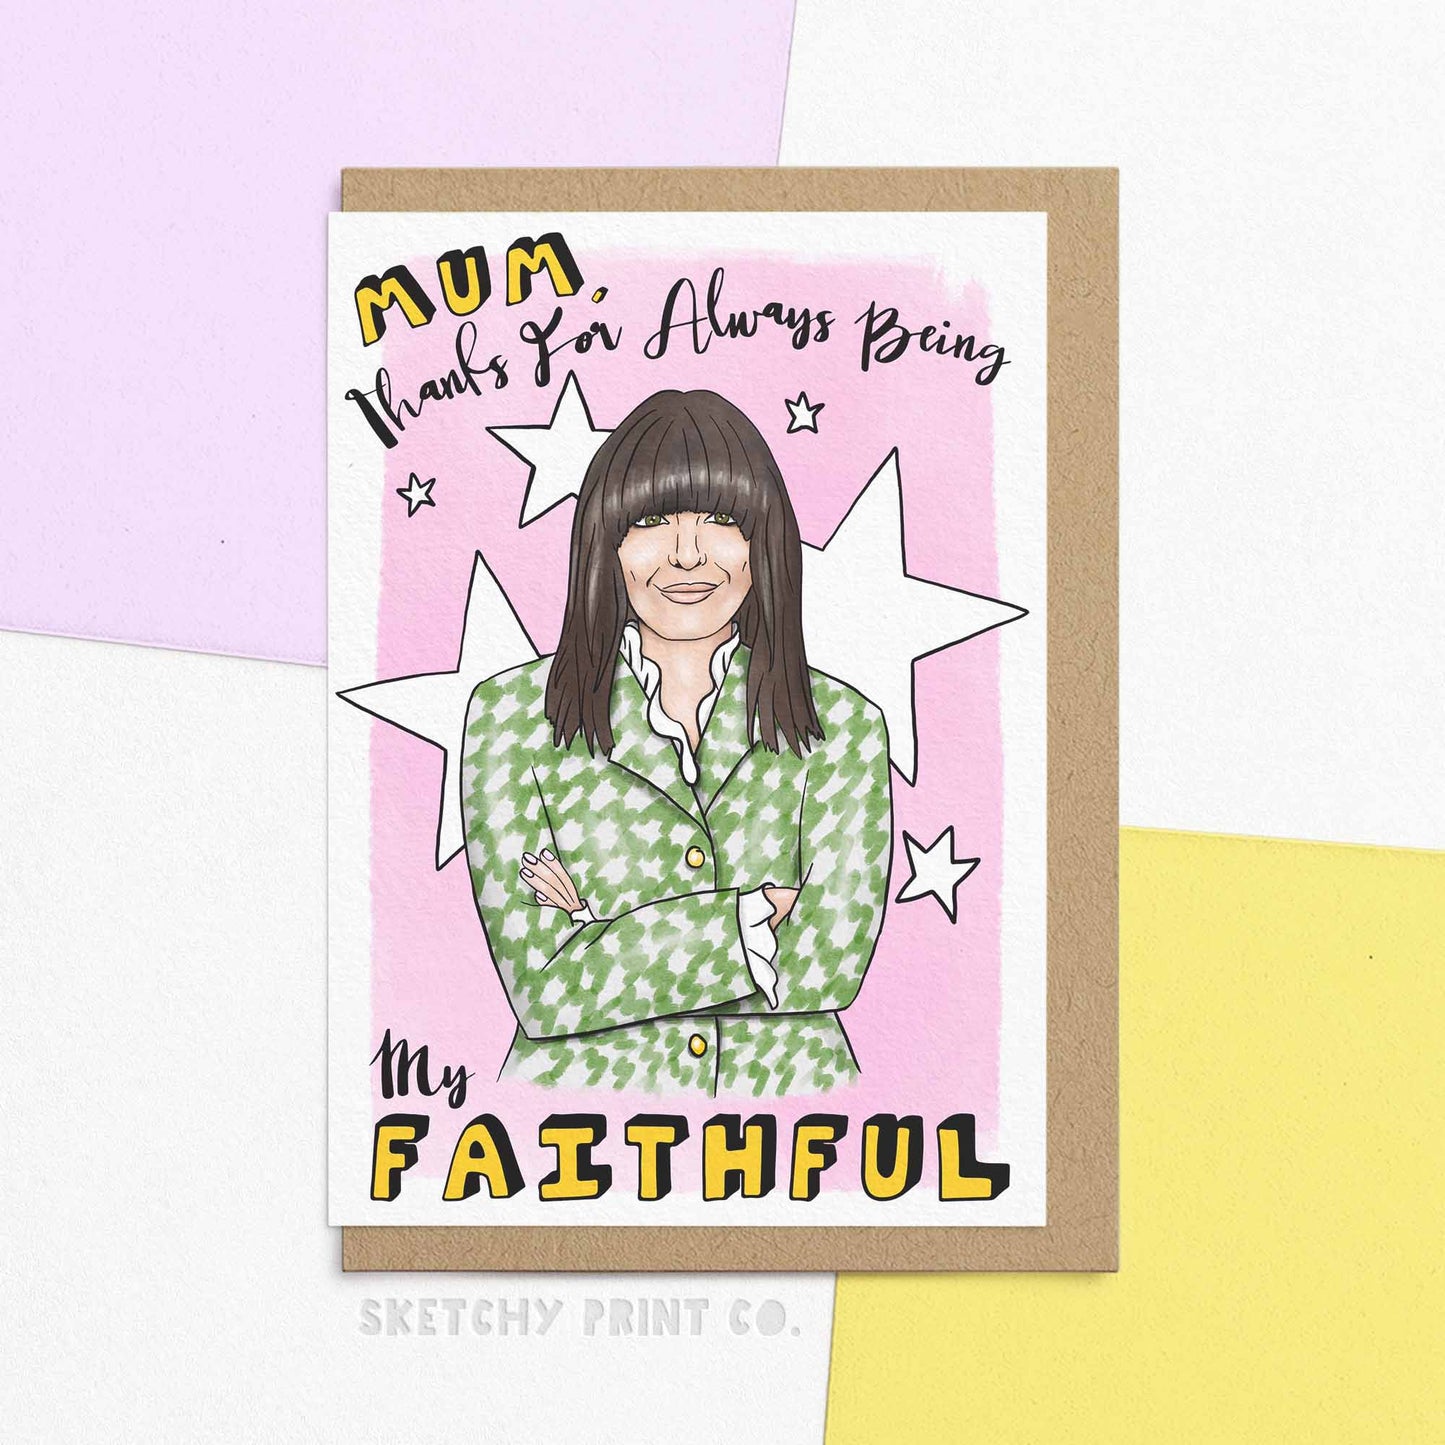 Gift your faithful Mum funny Mother's Day messages with our cute Mother's Day card - perfect for the mum who could never be a traitor! Funny Mothers Day Card for Mum. Reading 'Mum, Thanks for always being my faithful' With watercolour illustration of Winkleman.